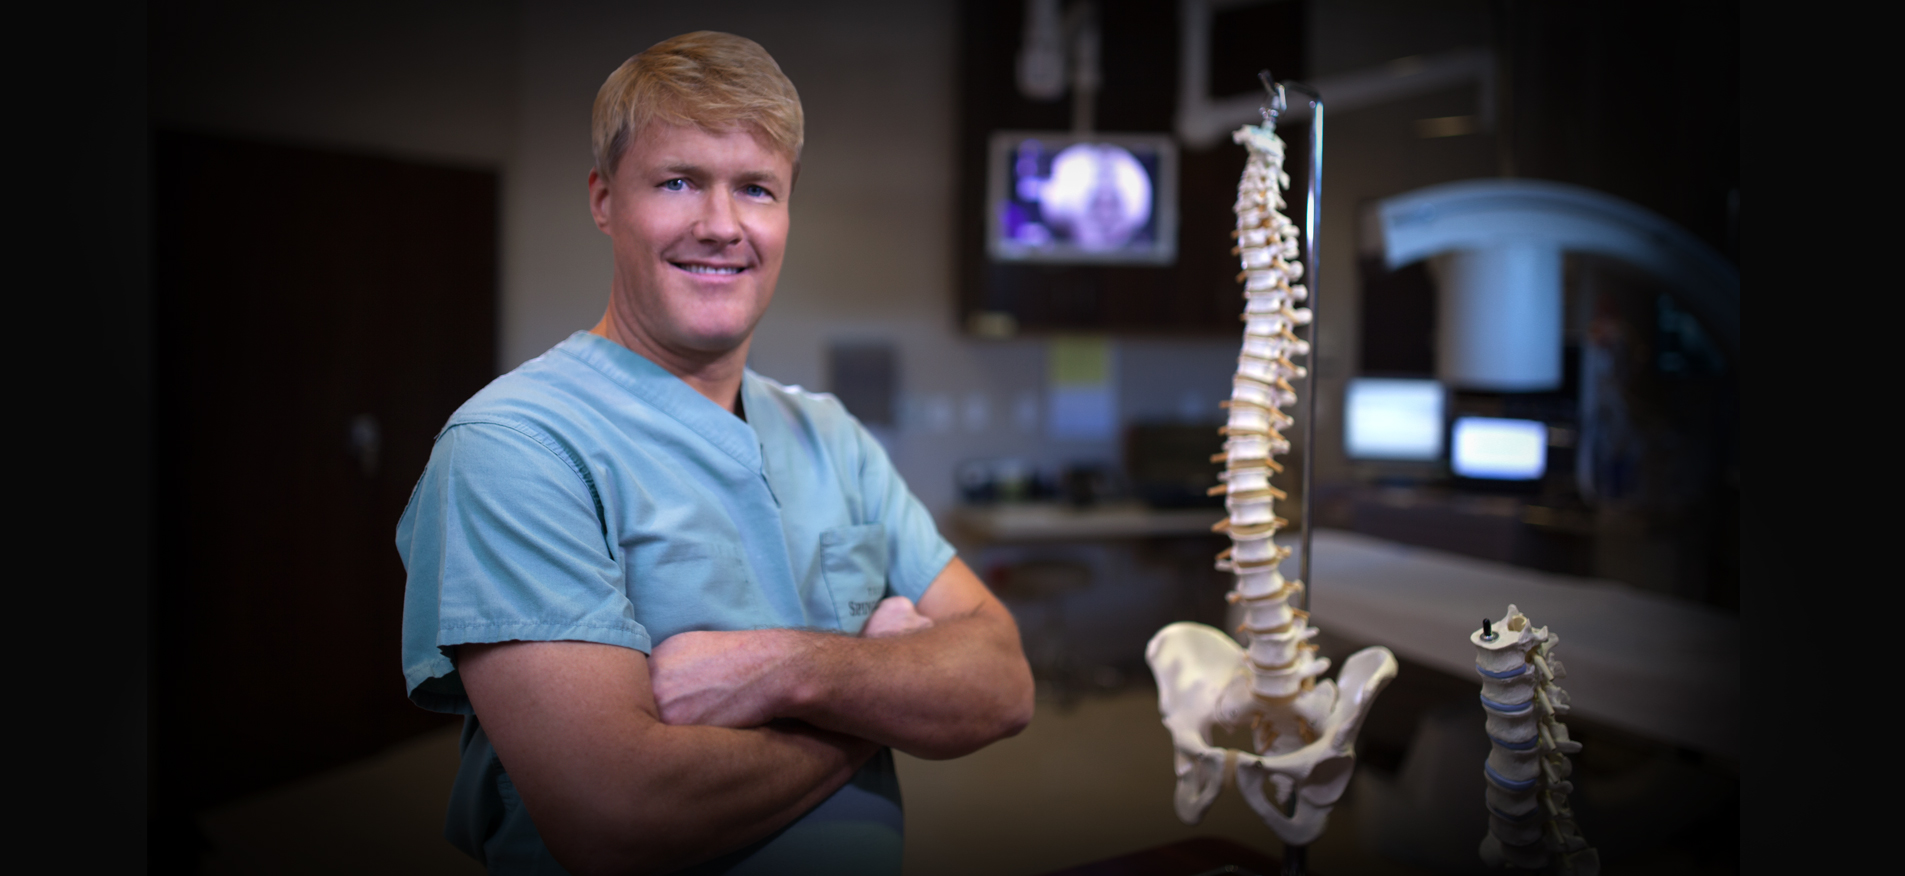 Thoracic Herniated Disk: Upper Back Pain - Dr. Kevin Pauza